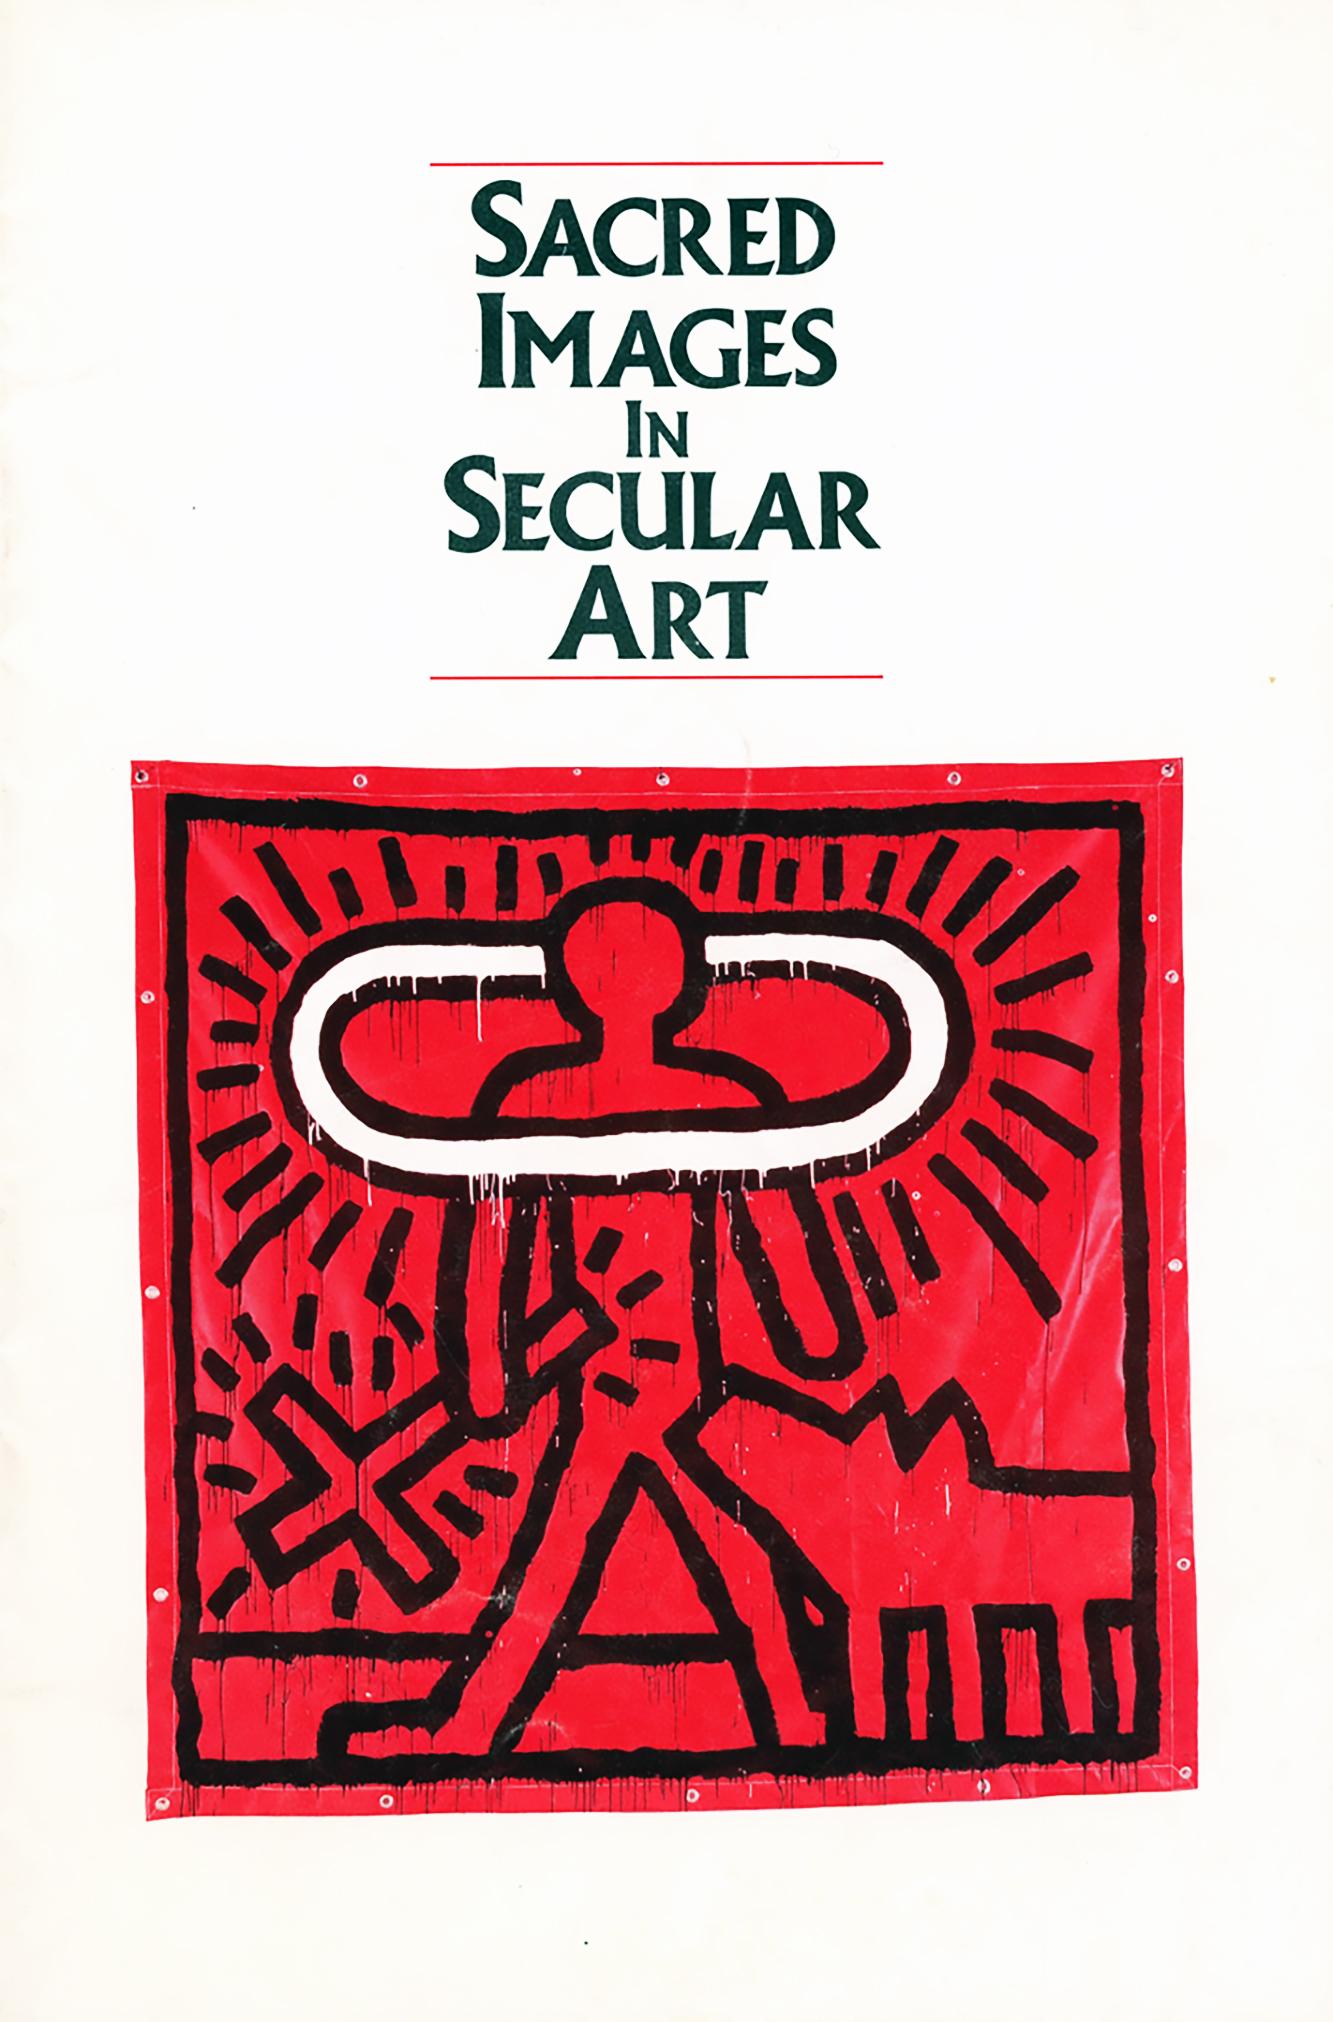 Keith Haring Sacred Images in Secular Art (Whitney Museum Catalogue 1986) - Print by (after) Keith Haring